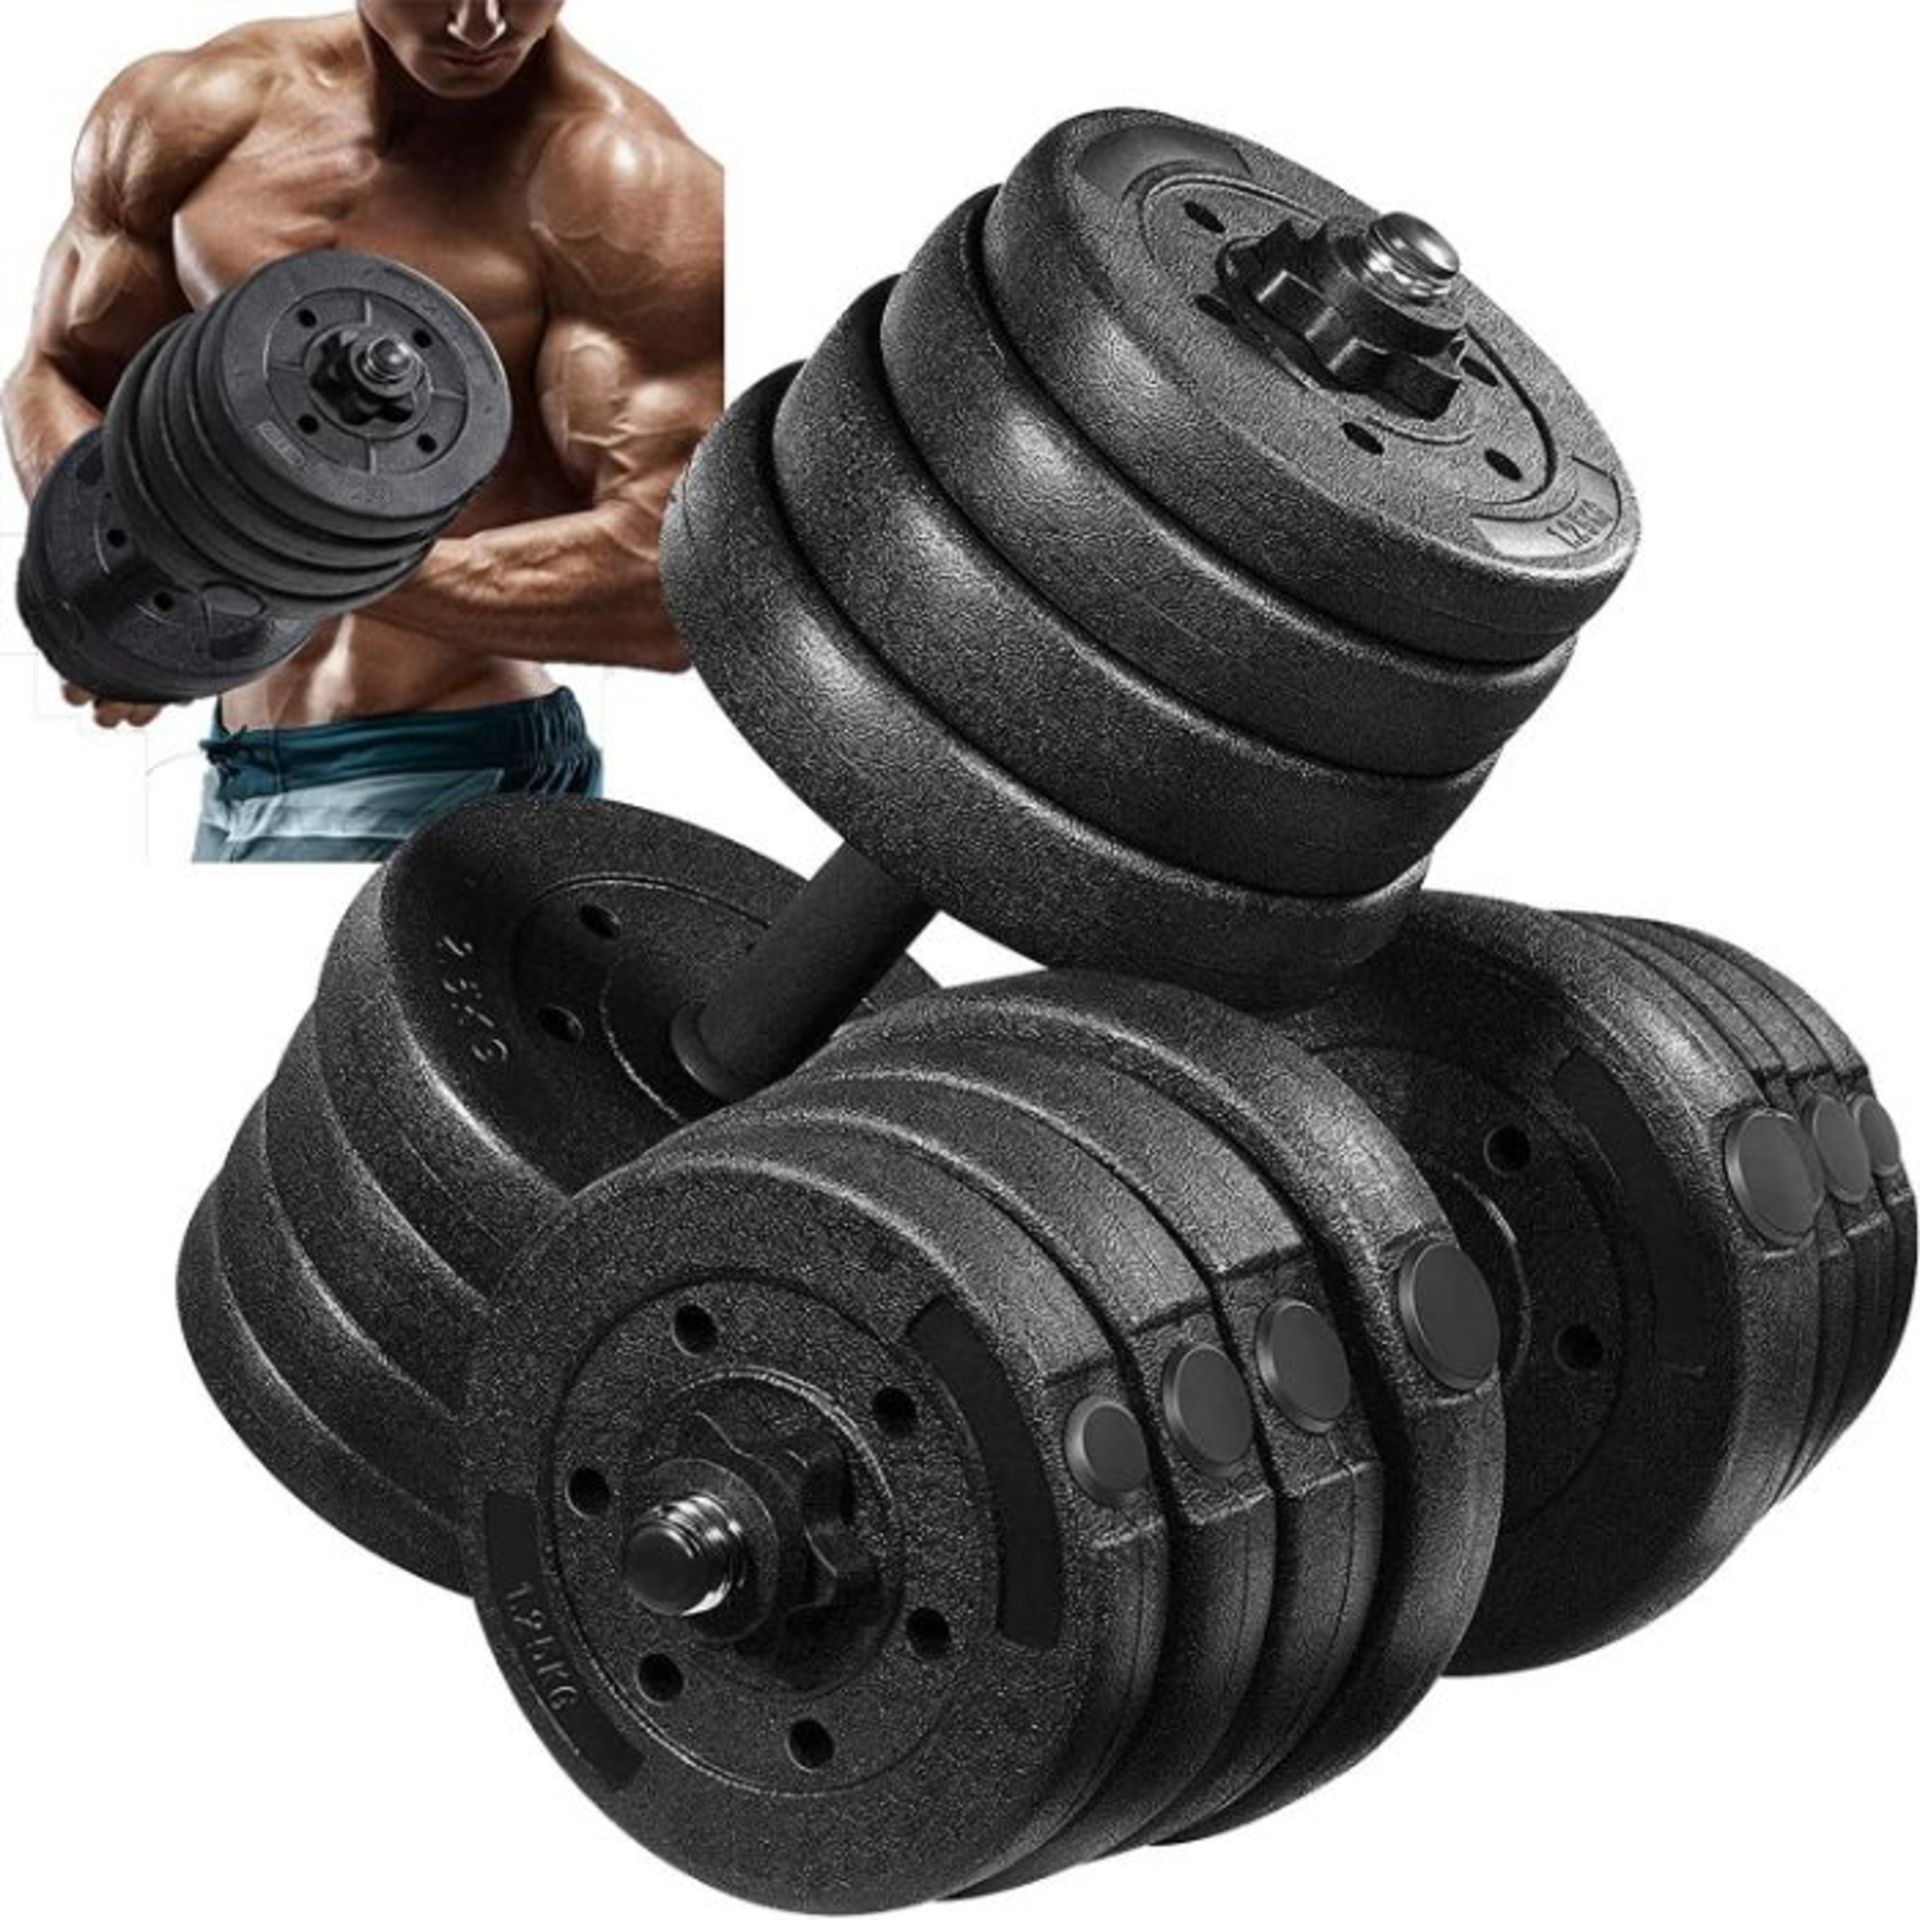 10x Movtotop 30KG adjustable Dumb Bell weight set, new and boxed, we can only find these in - Image 5 of 6